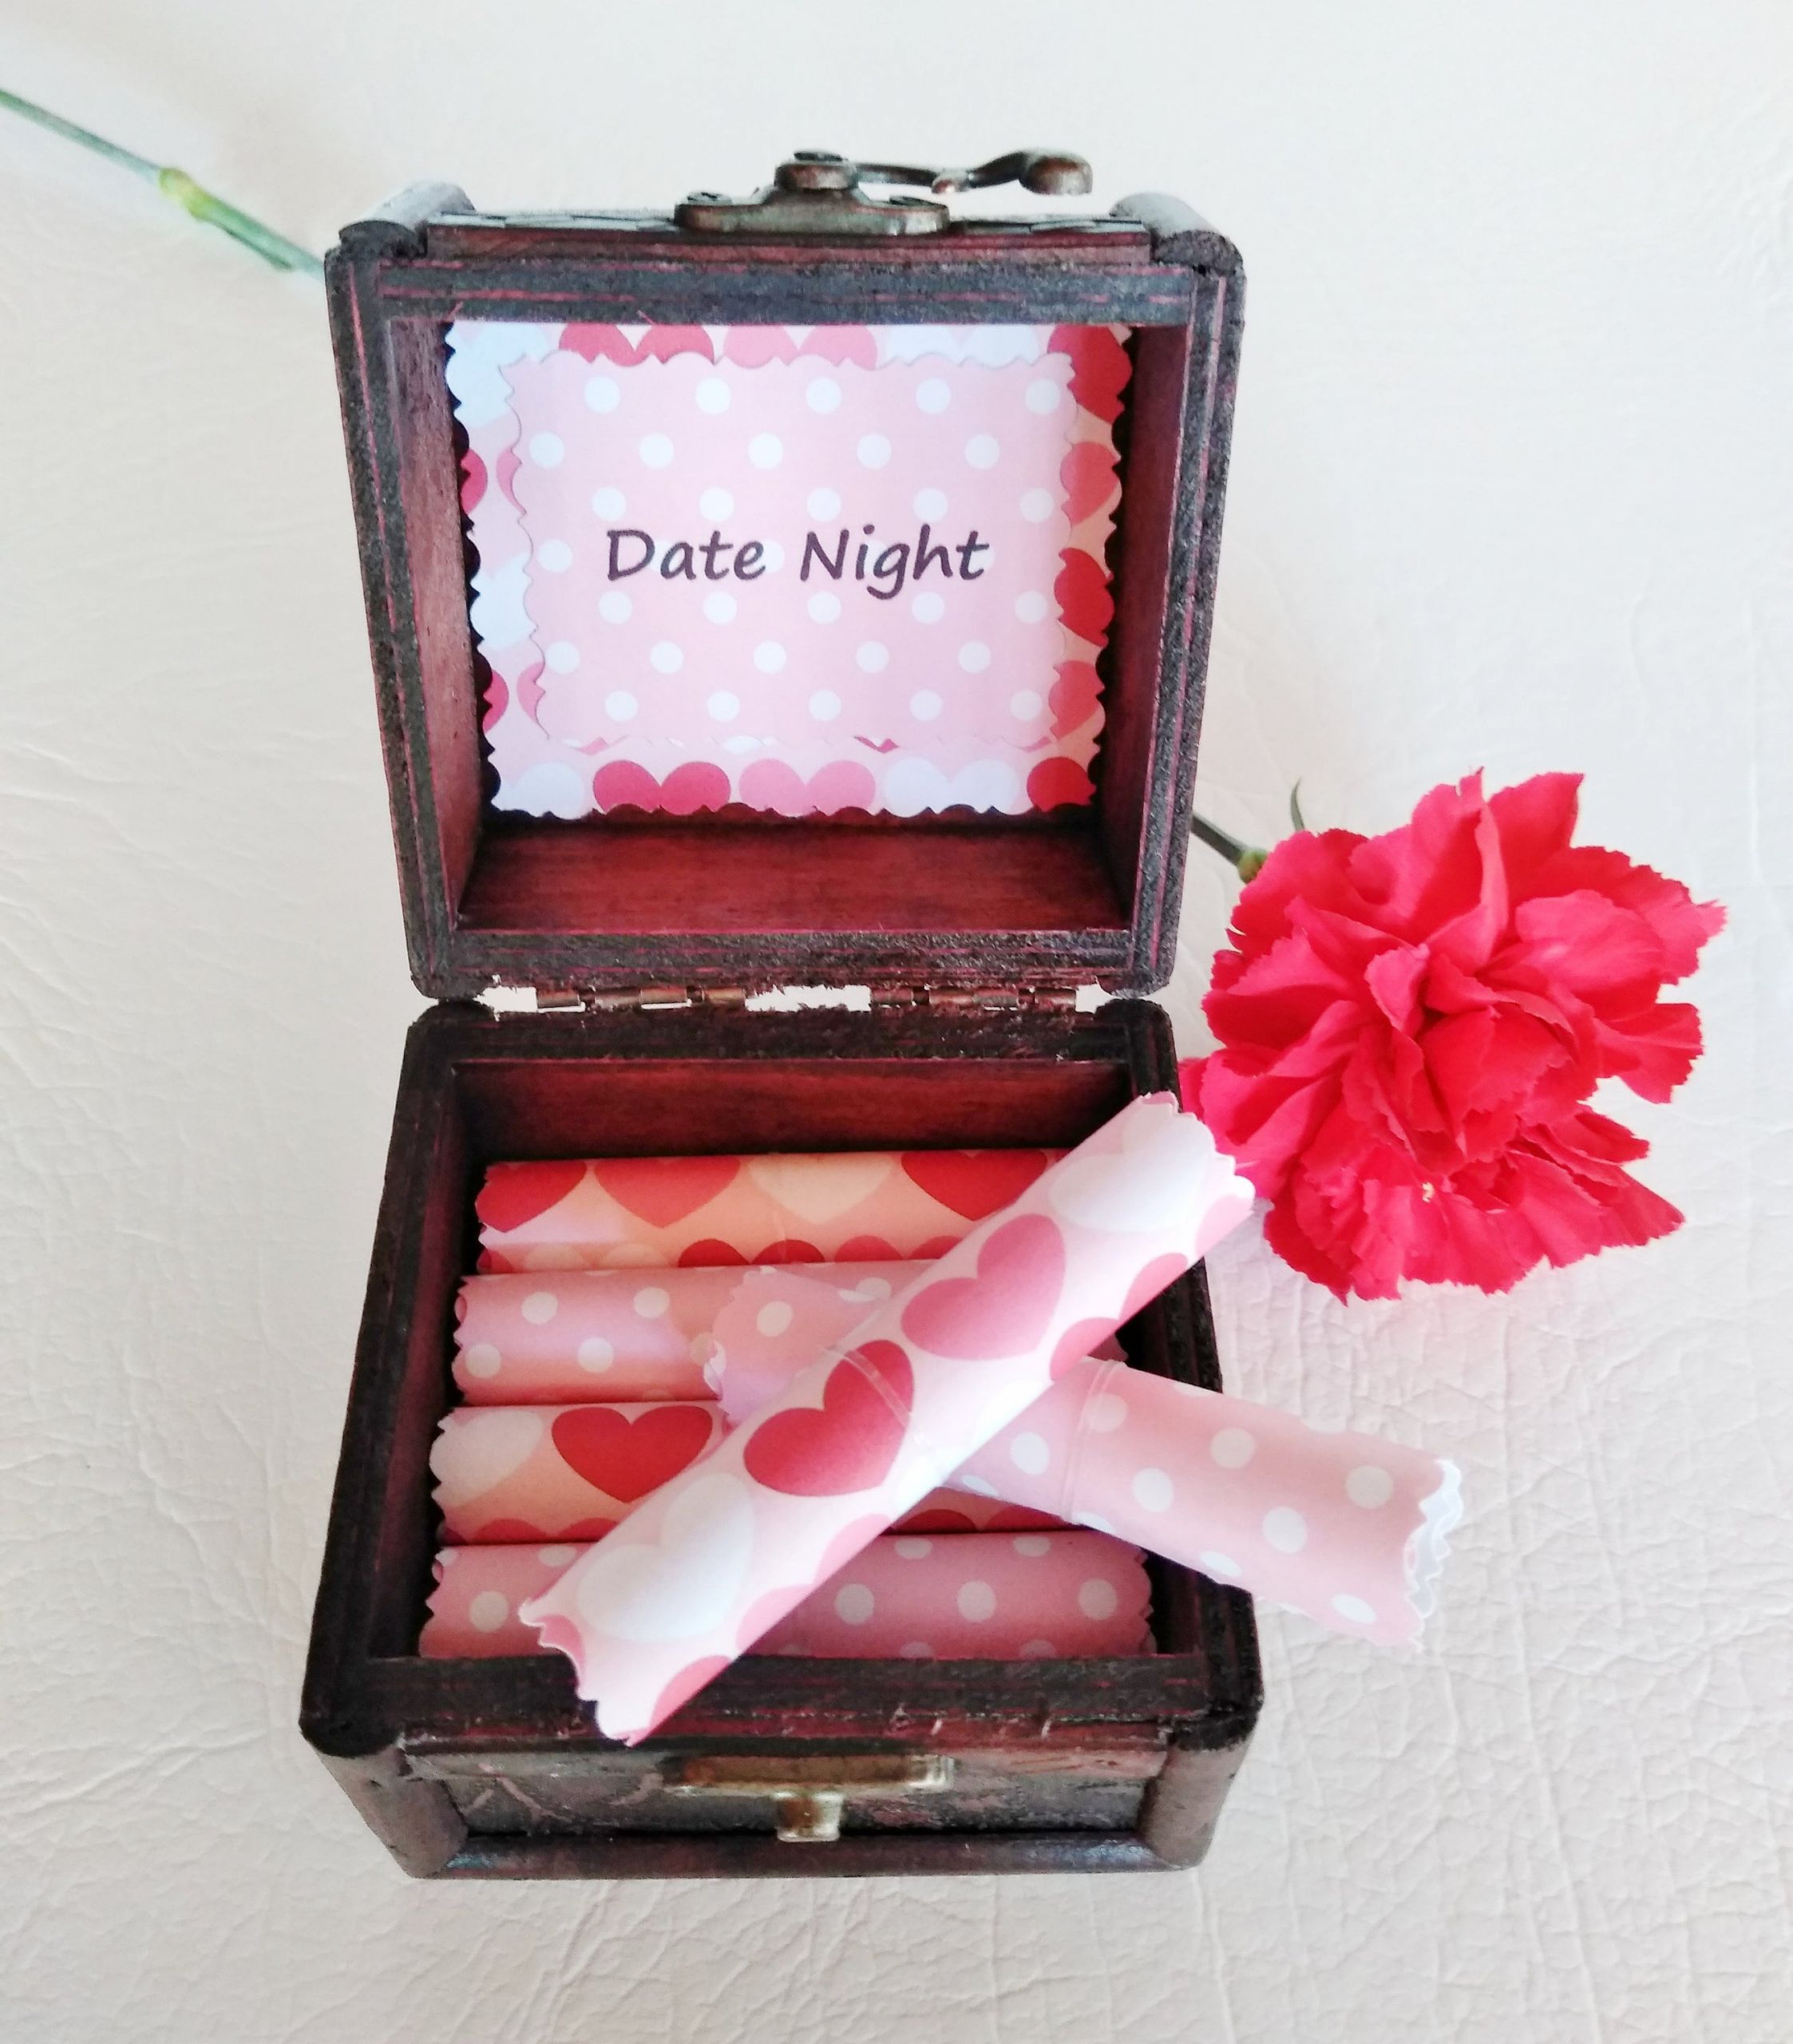 Valentines Gift For Her Ideas
 Valentine Date Box 18 Romantic Date Night Ideas in a